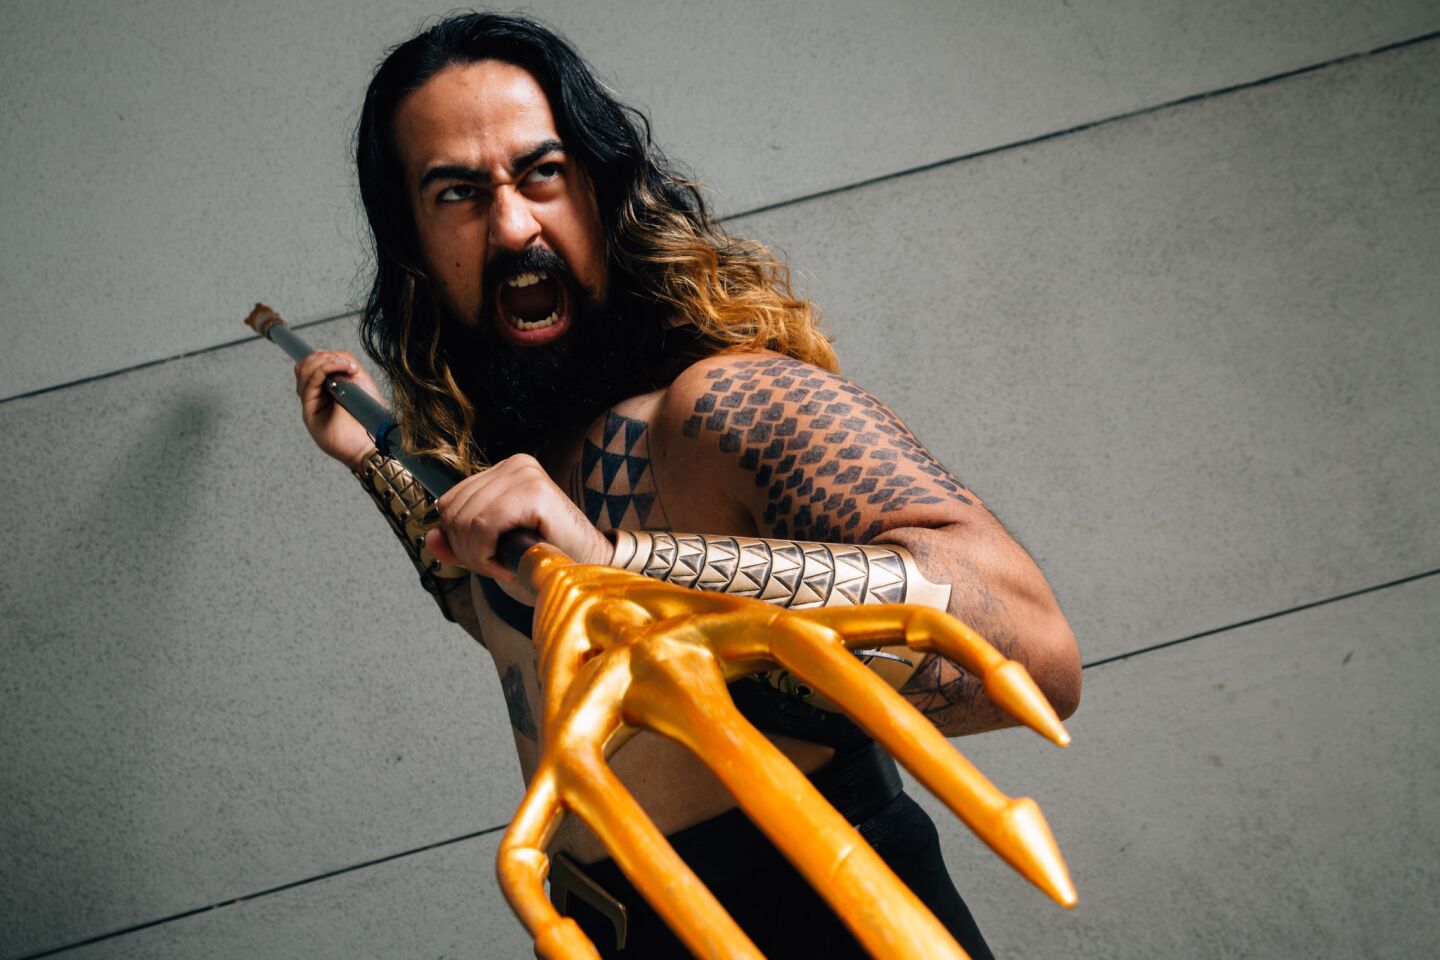 Shad Armstrong, 29, of Los Angeles, cosplays as DC’s Aquaman (the Jason Momoa movie version).